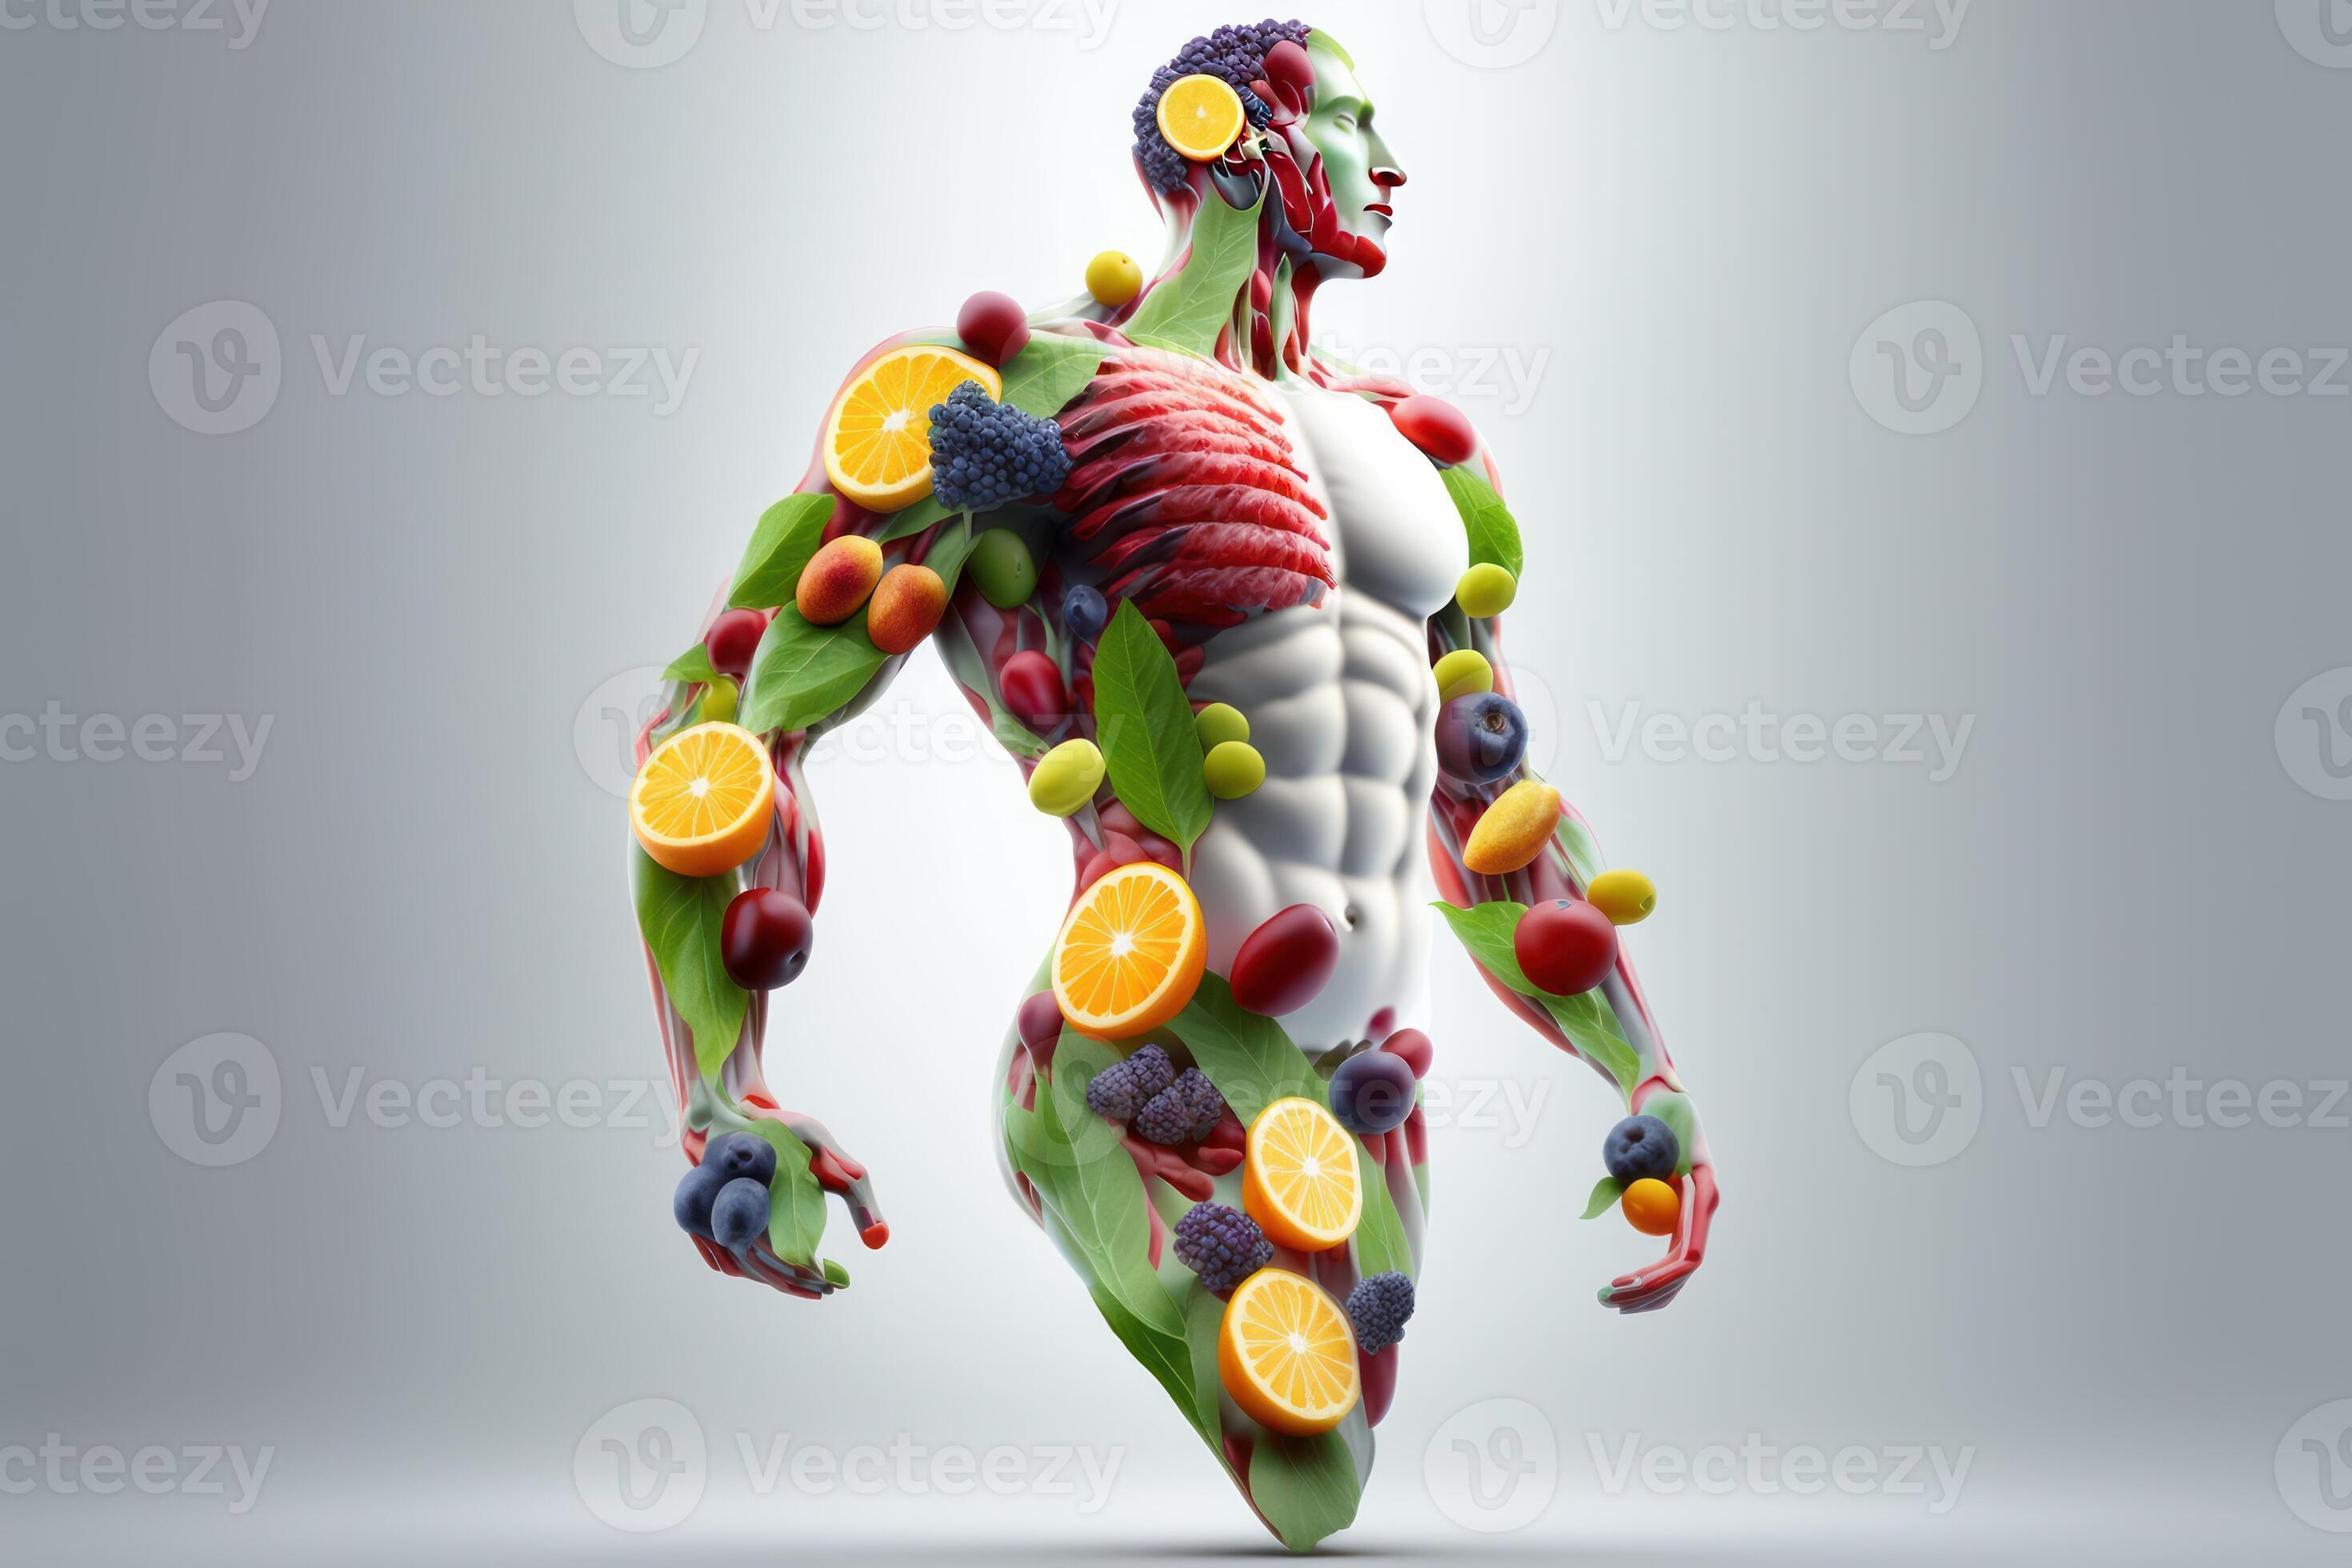 Fruits forming a strong body, Man posing muscular body builder